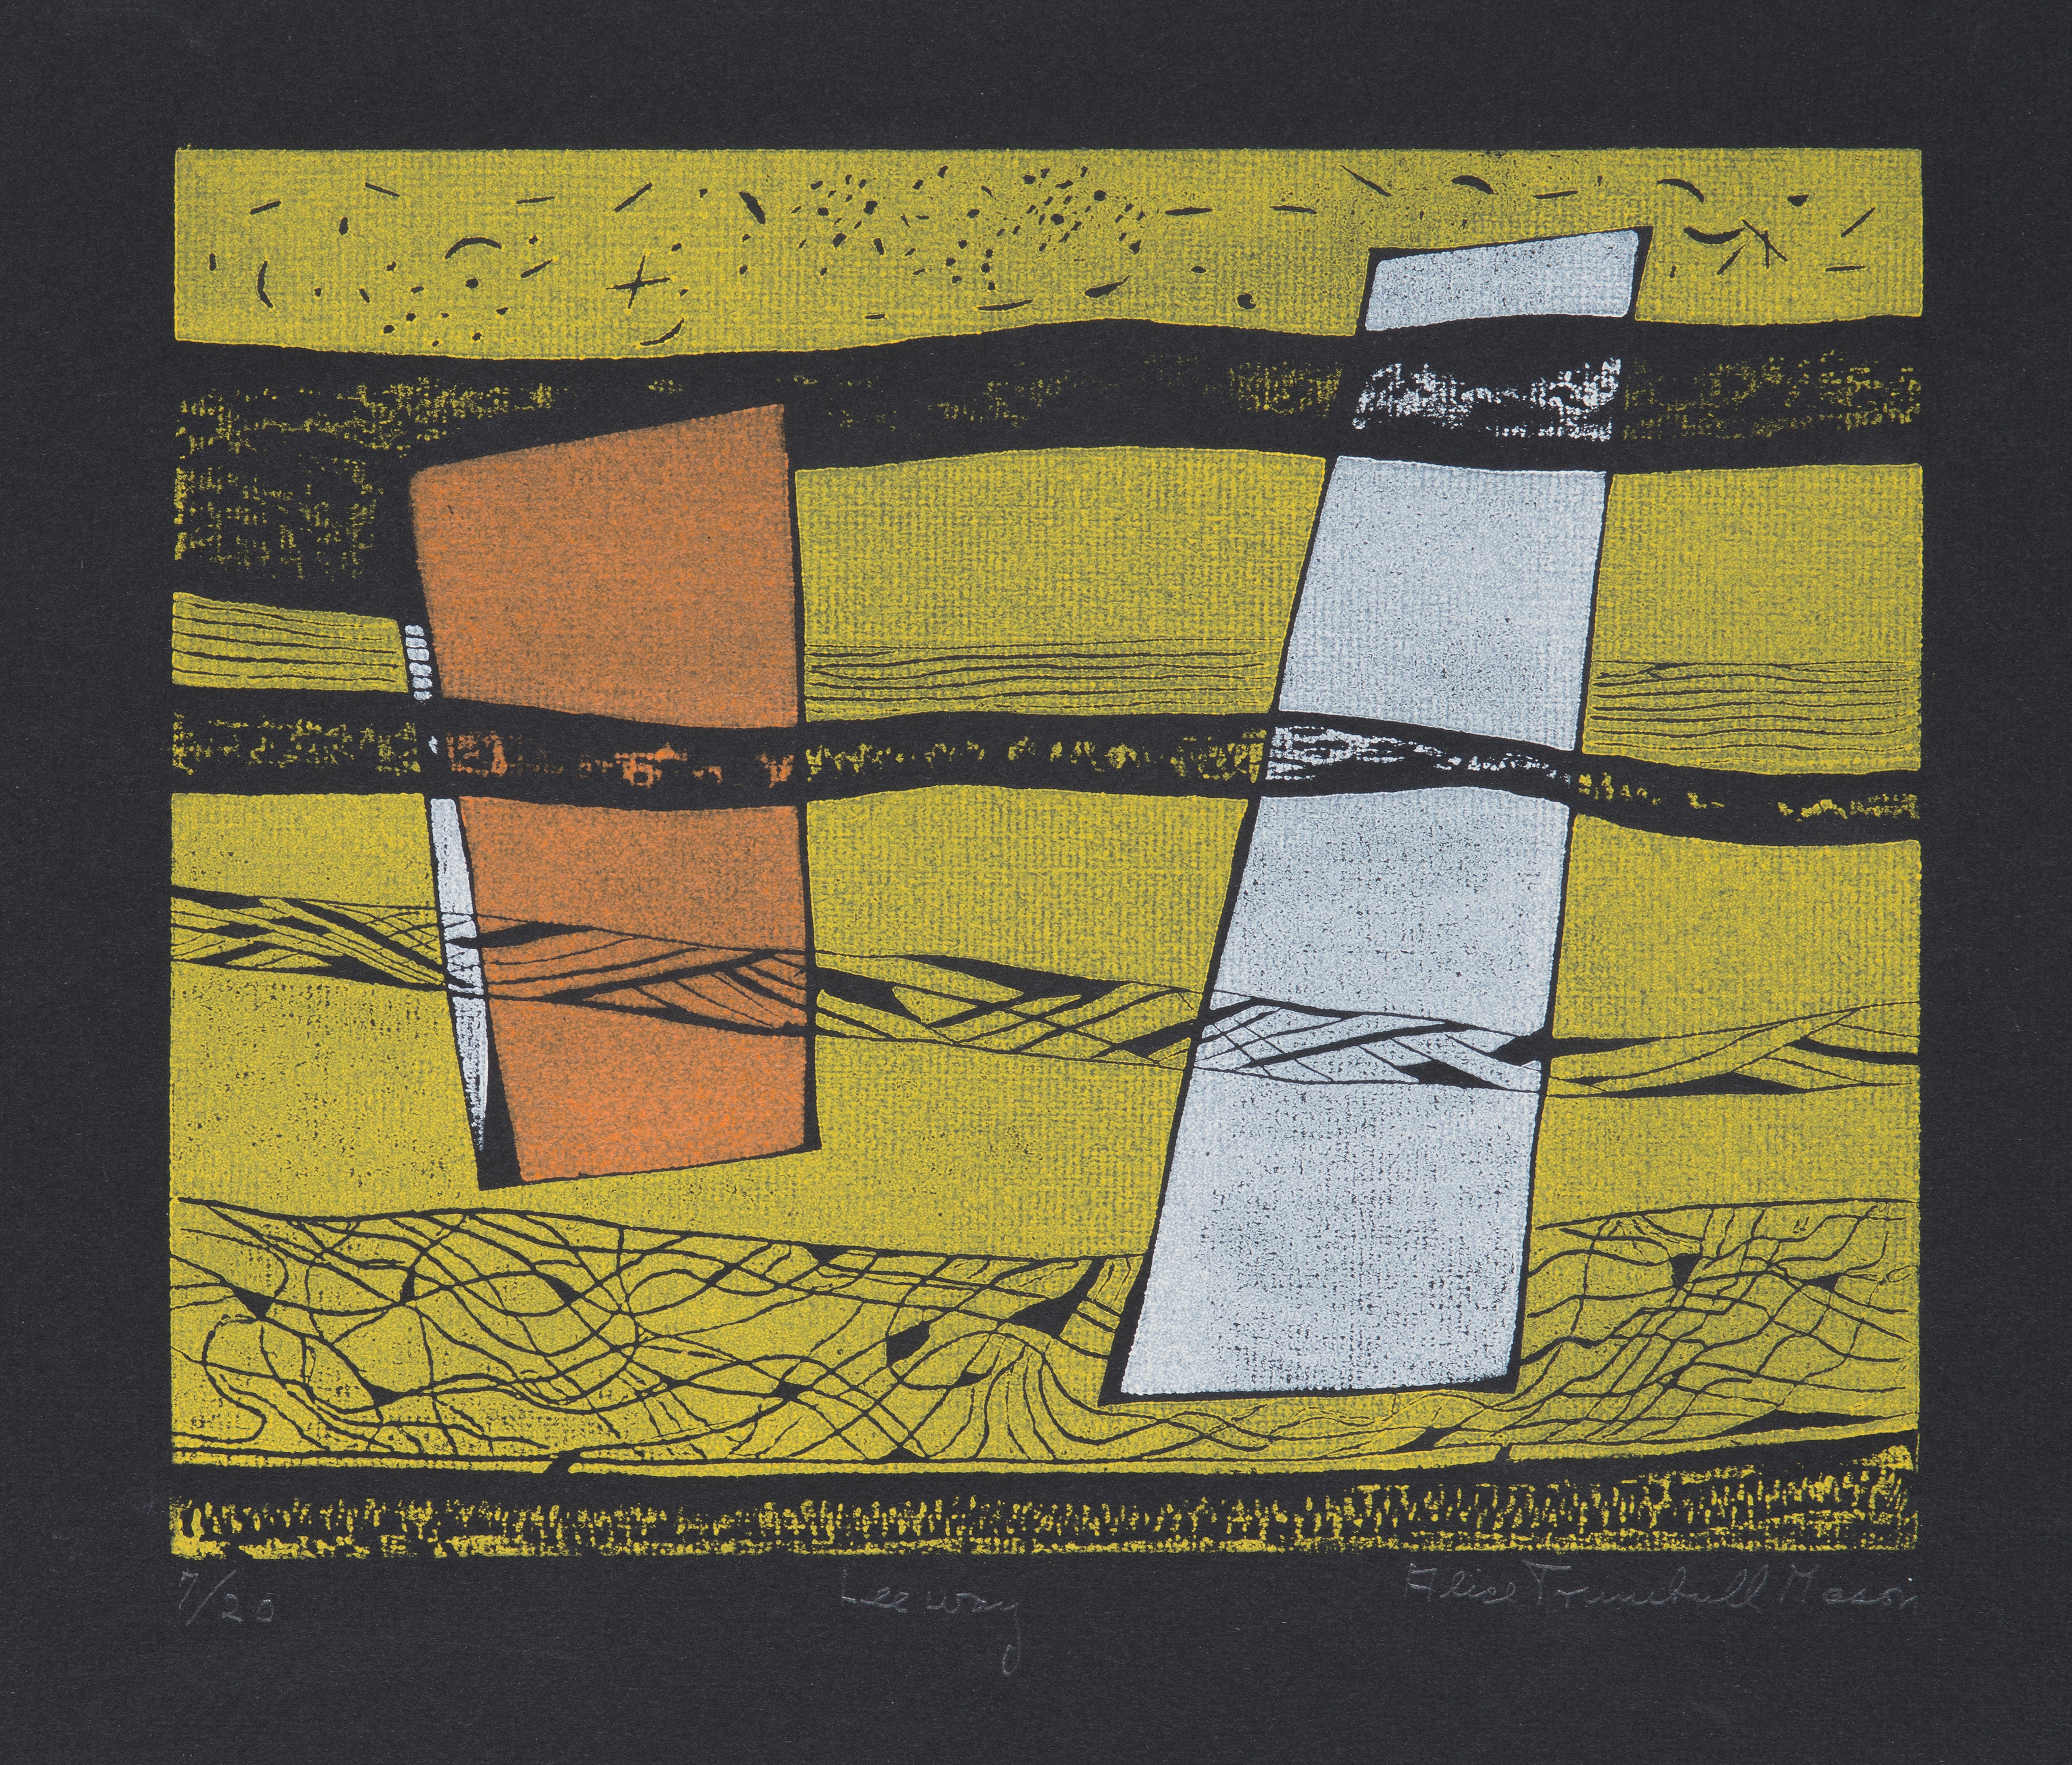 An abstract print on black paper of vertical, slanted rectangles; one white and one orange. These shapes are layered between black curved lines, with a horizontal yellow rectangle in the background.